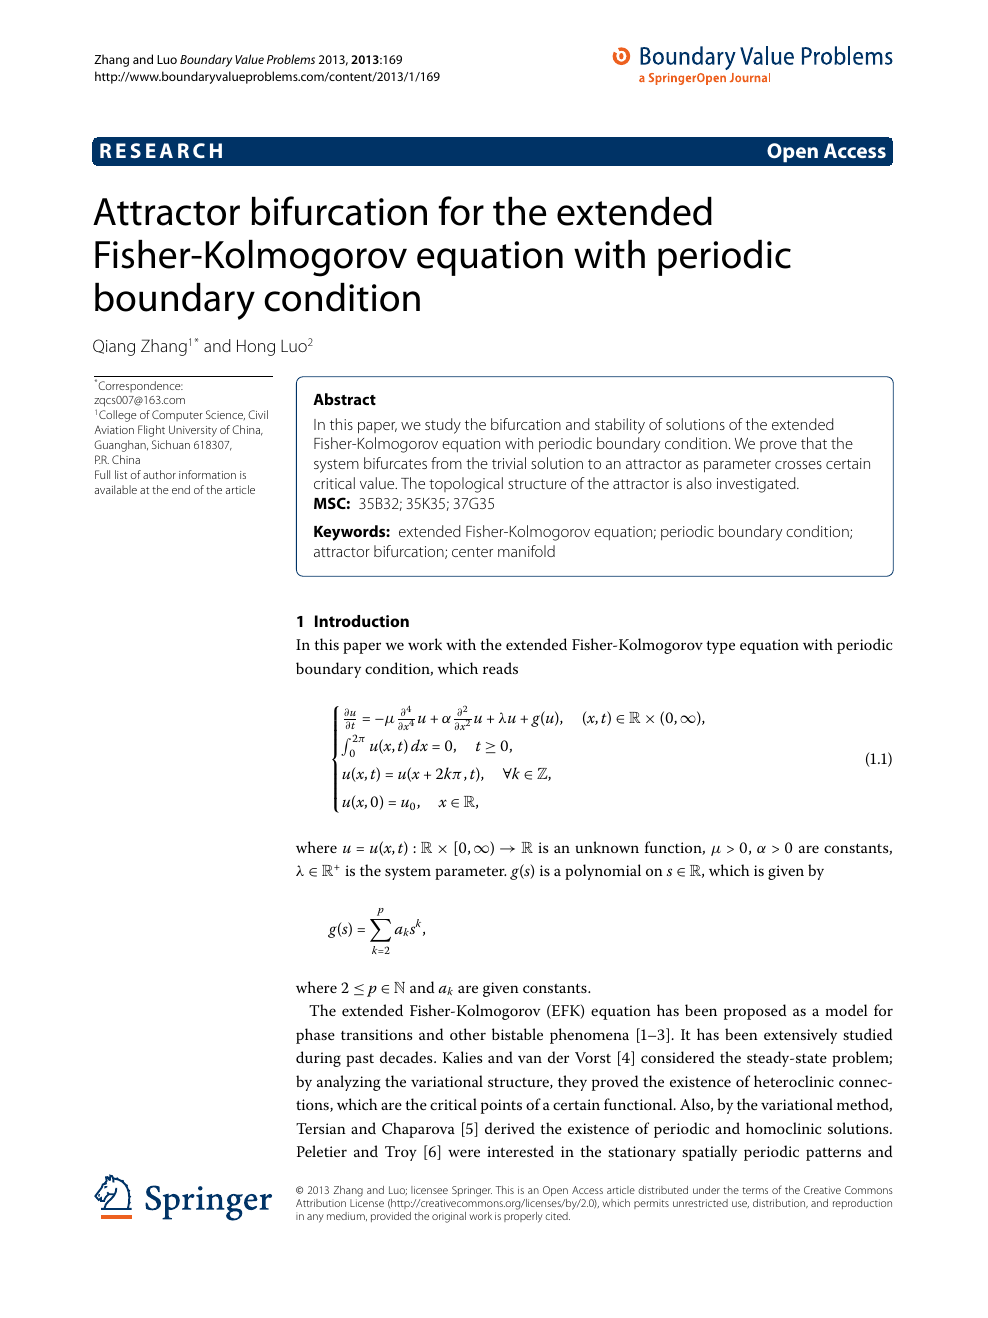 Attractor Bifurcation For The Extended Fisher Kolmogorov Equation With Periodic Boundary Condition Topic Of Research Paper In Mathematics Download Scholarly Article Pdf And Read For Free On Cyberleninka Open Science Hub